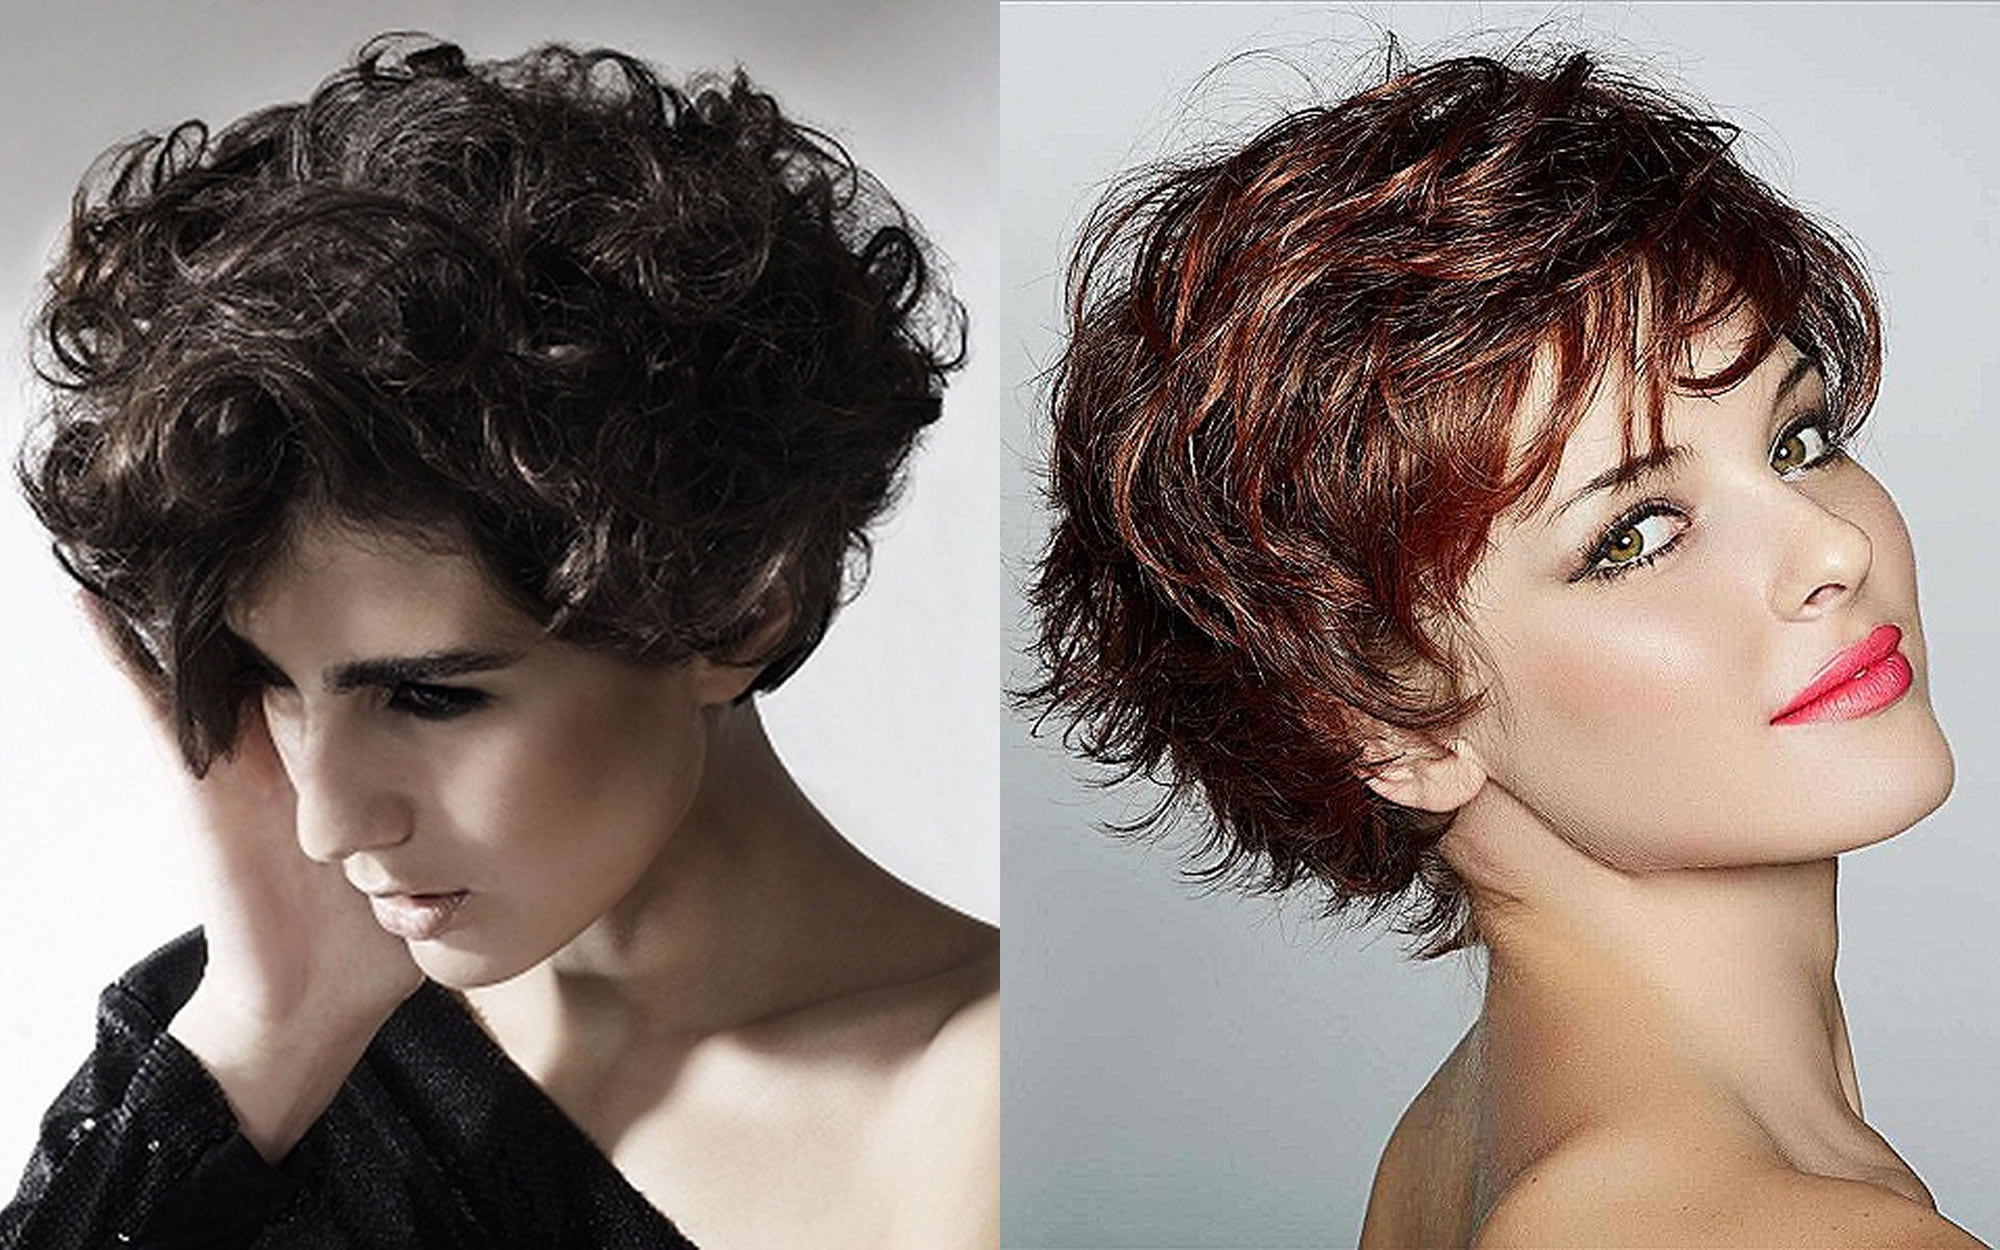 Curly Short Hairstyles for Women - Trendy Hair Colors for ...